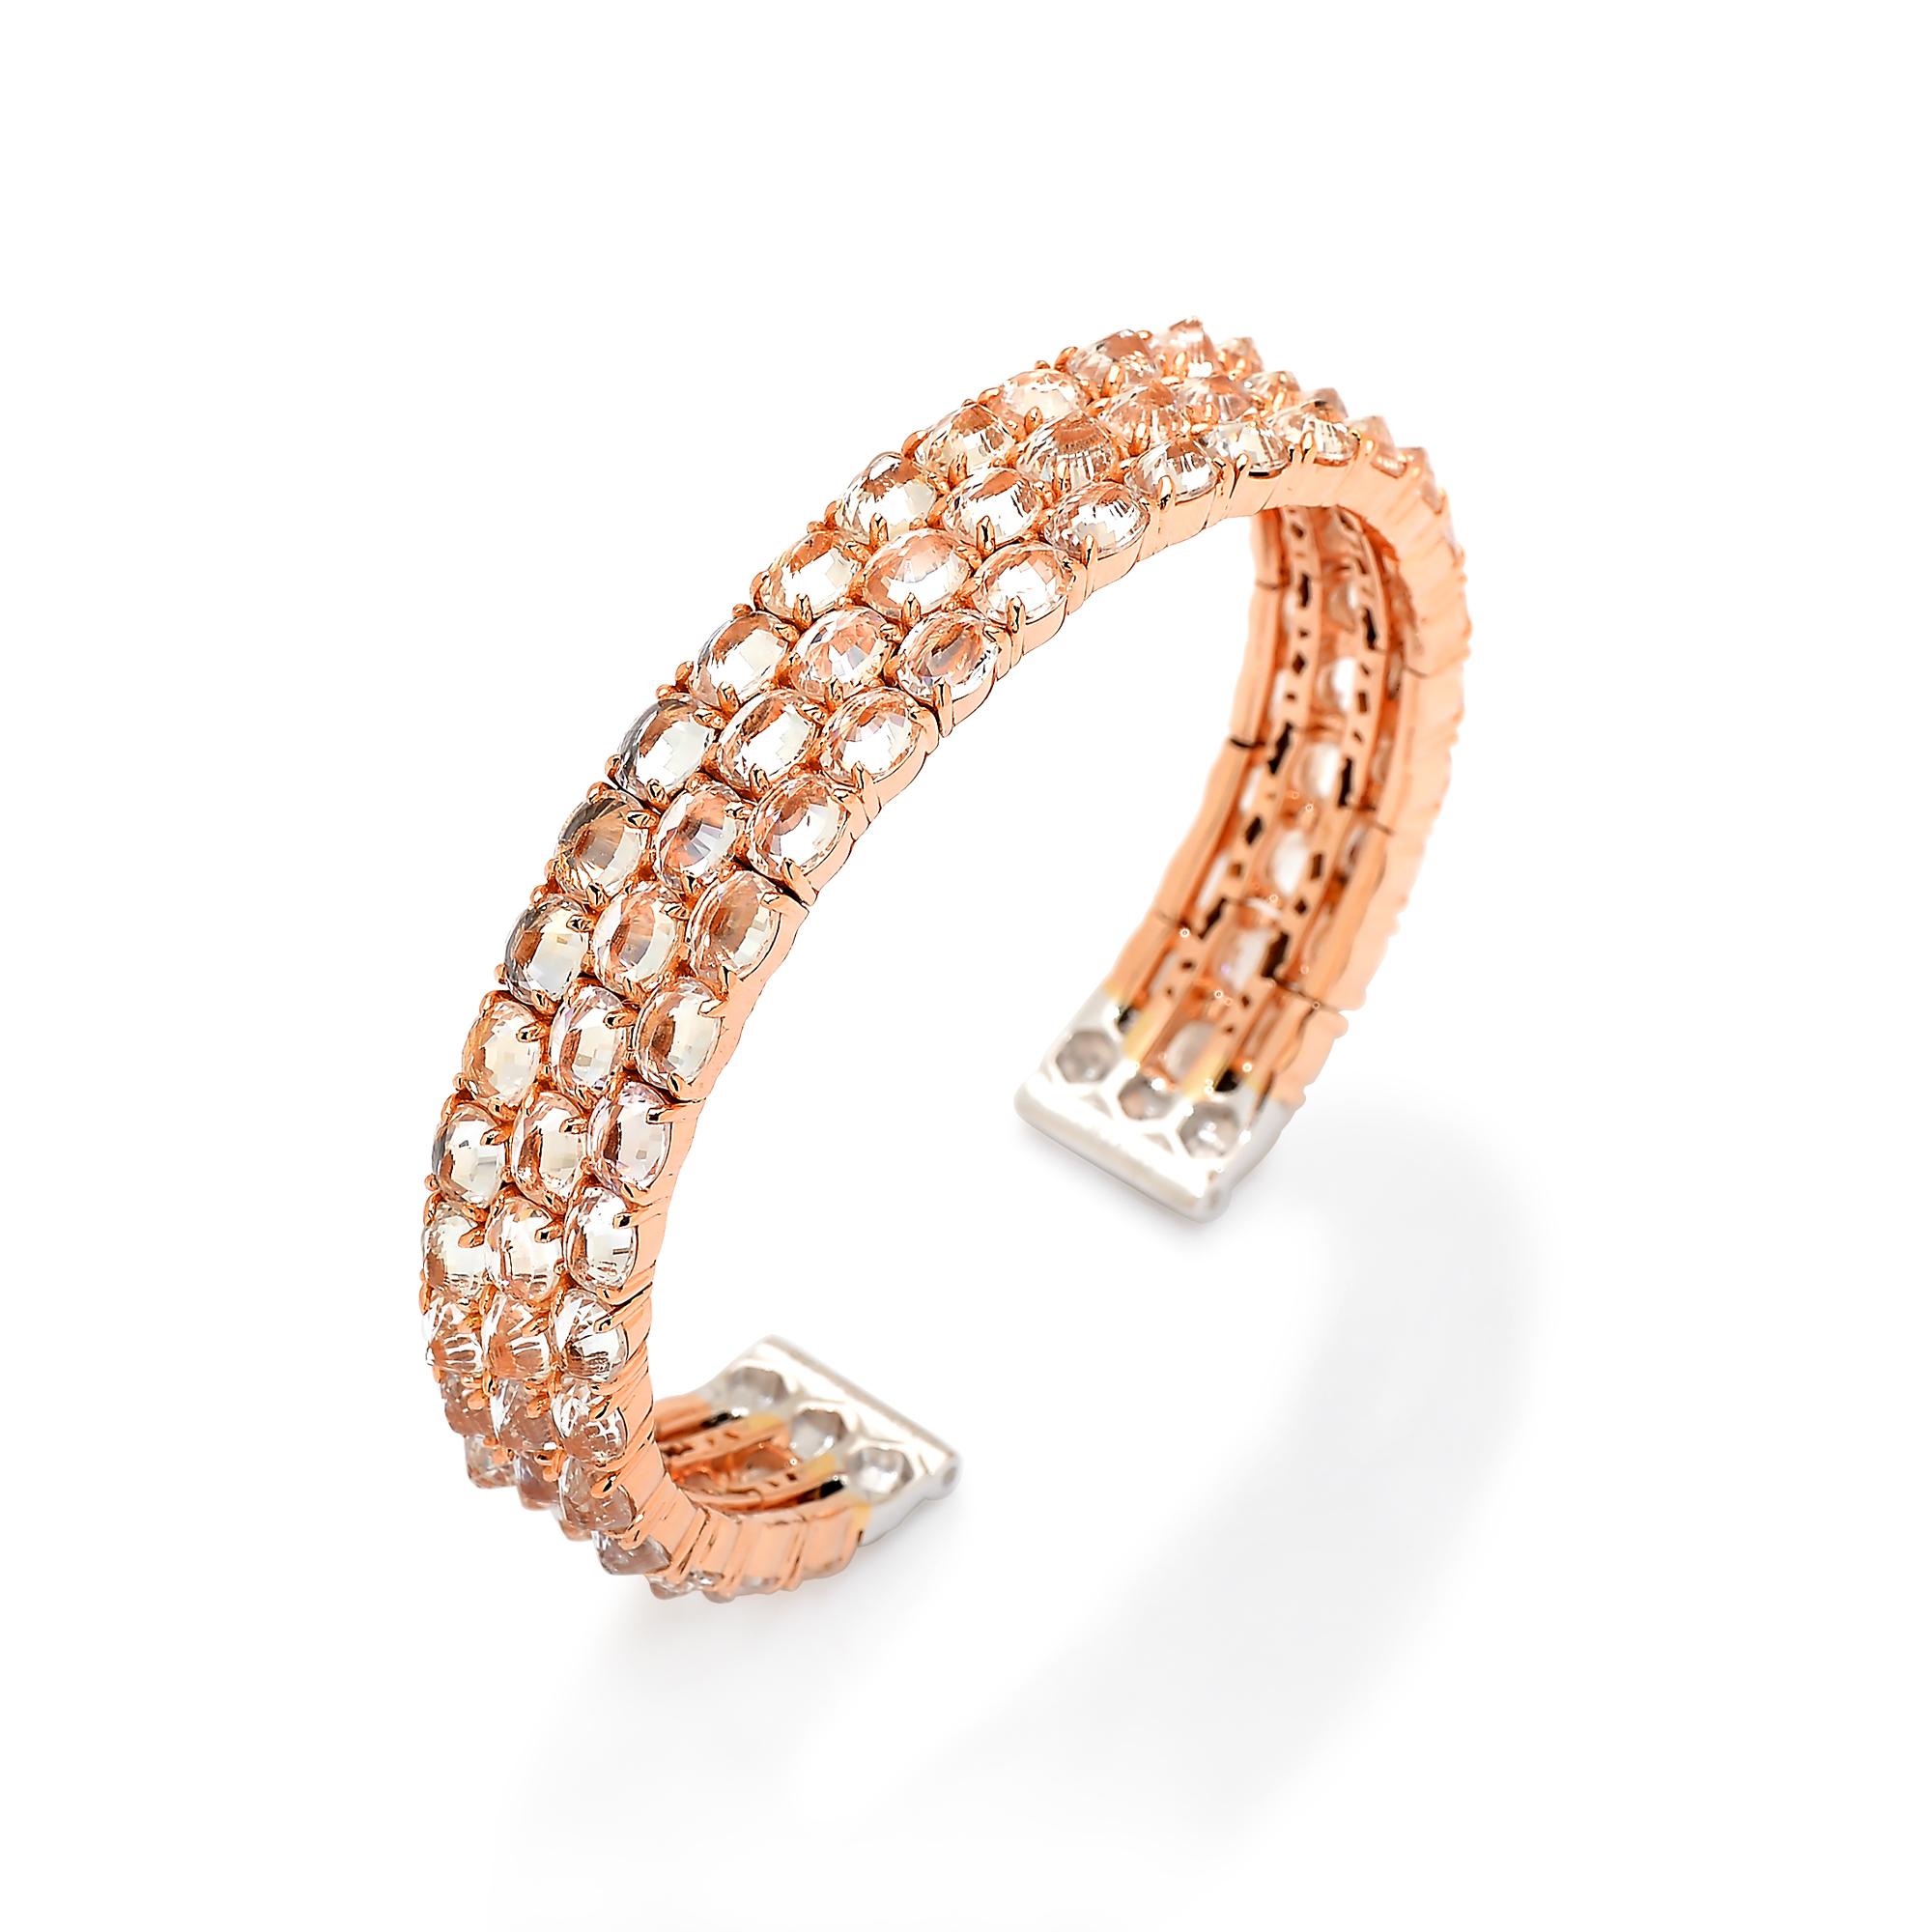 From the Ombre Collection, white sapphire flexible cuff bracelet with pave-set round, brilliant diamonds in 18 karat rose gold. 

Reimagined from summers spent at the Tuscan shore, the Ombre Collection highlights the diverse hues and textures found